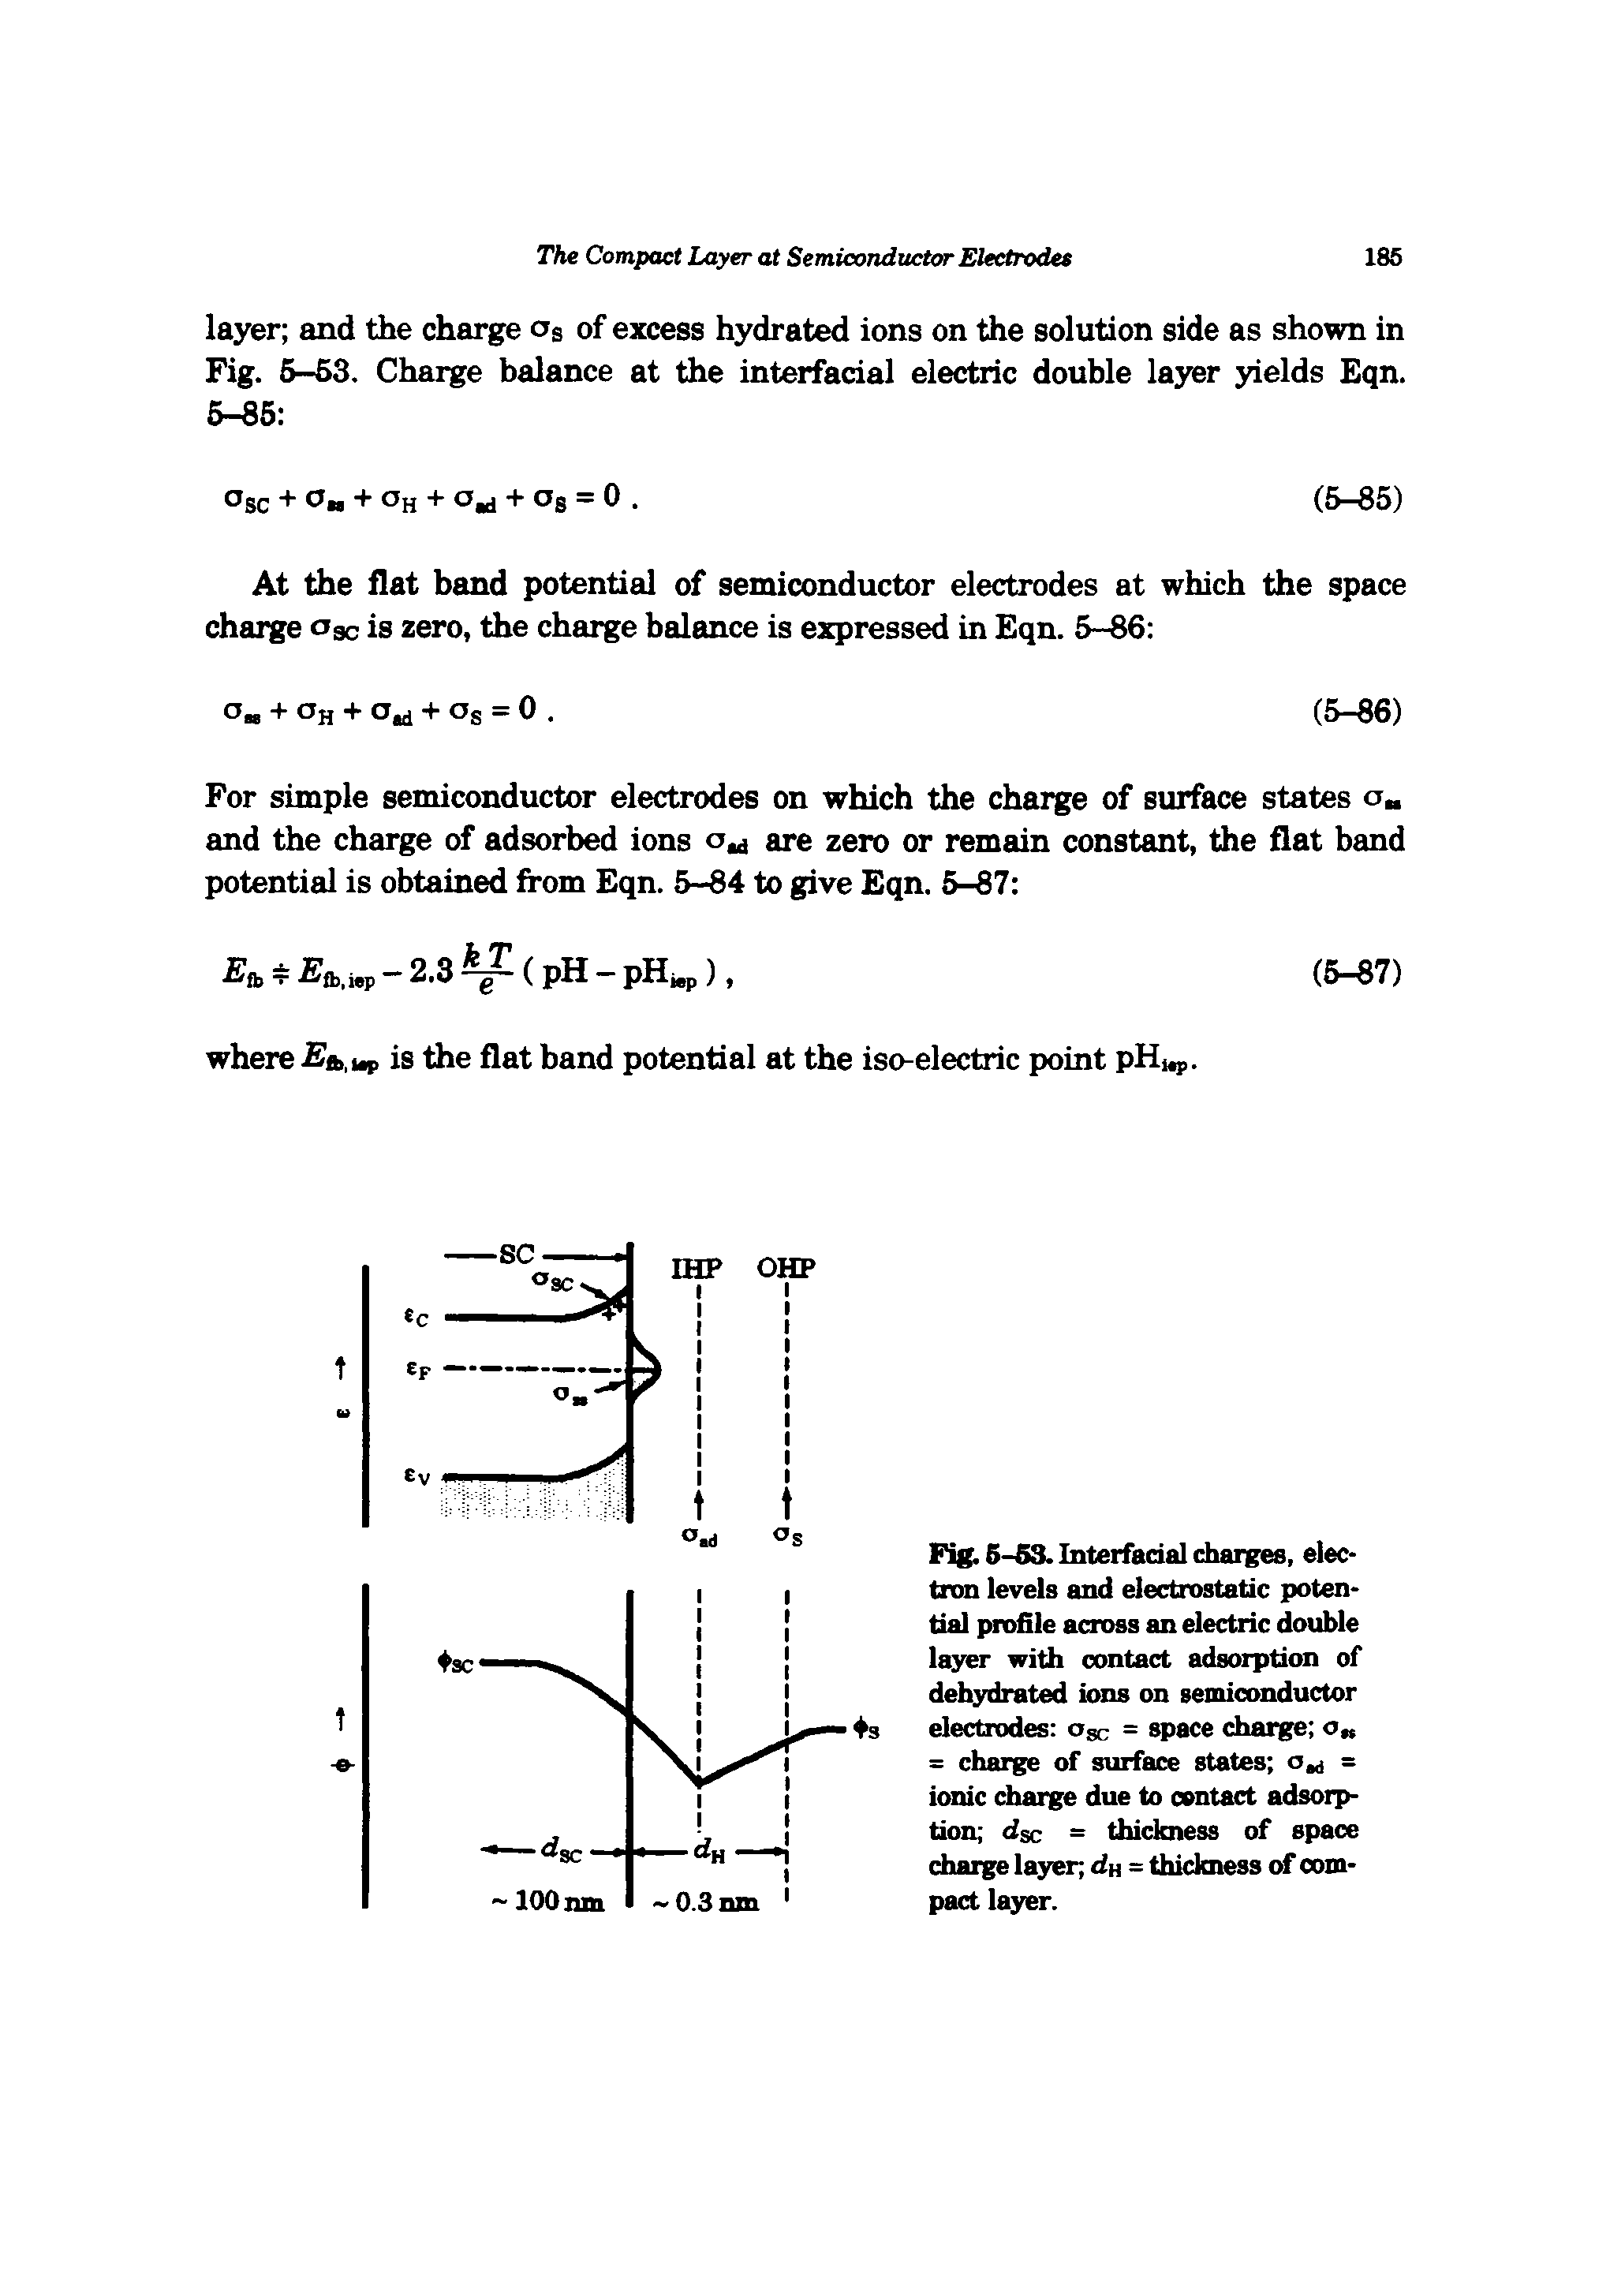 Fig. 6-53. Interfadal charges, electron levels and electrostatic potential profile across an electric double layer with contact adsorption of dehydrated ions on semiconductor electrodes ogc = space charge o = charge of surface states = ionic charge due to contact adsorption dsc = thickness of space charge layer da = thickness of compact la3rer.